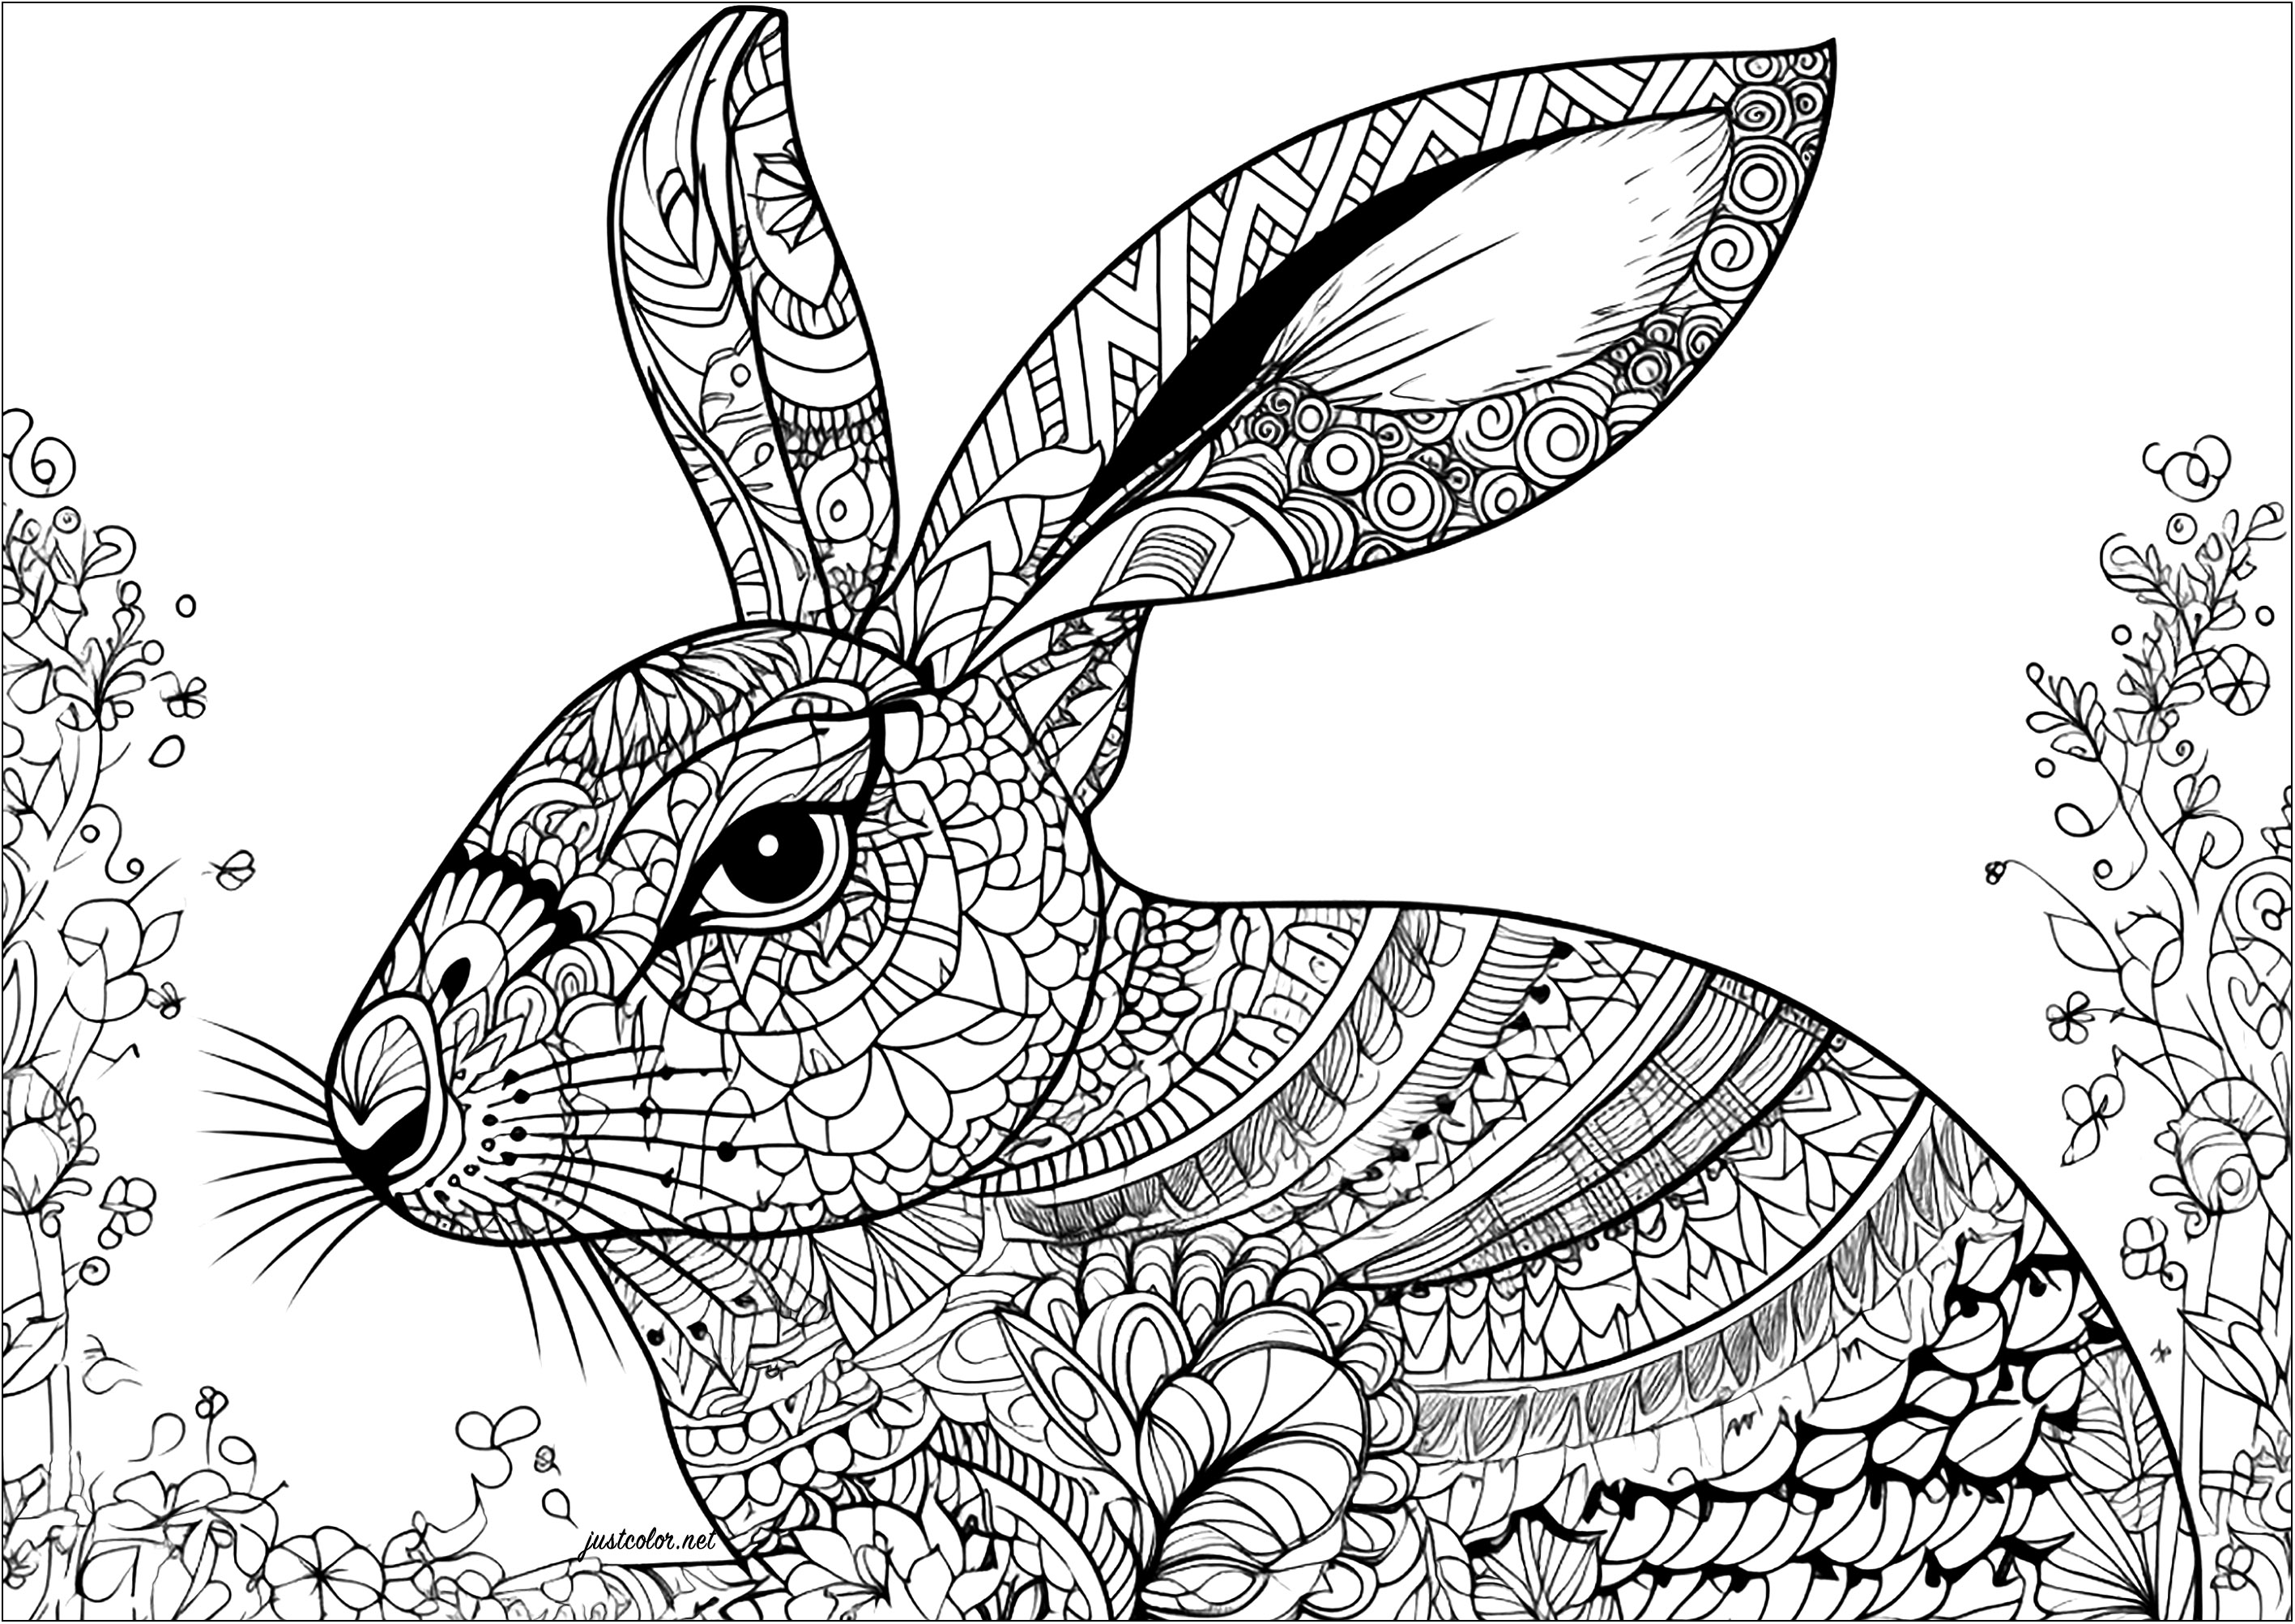 Rabbit and complex patterns. A beautiful rabbit coloring page with intricate and diverse designs. This coloring book will take you a long time to complete, but it's sure to bring you optimal peace of mind.